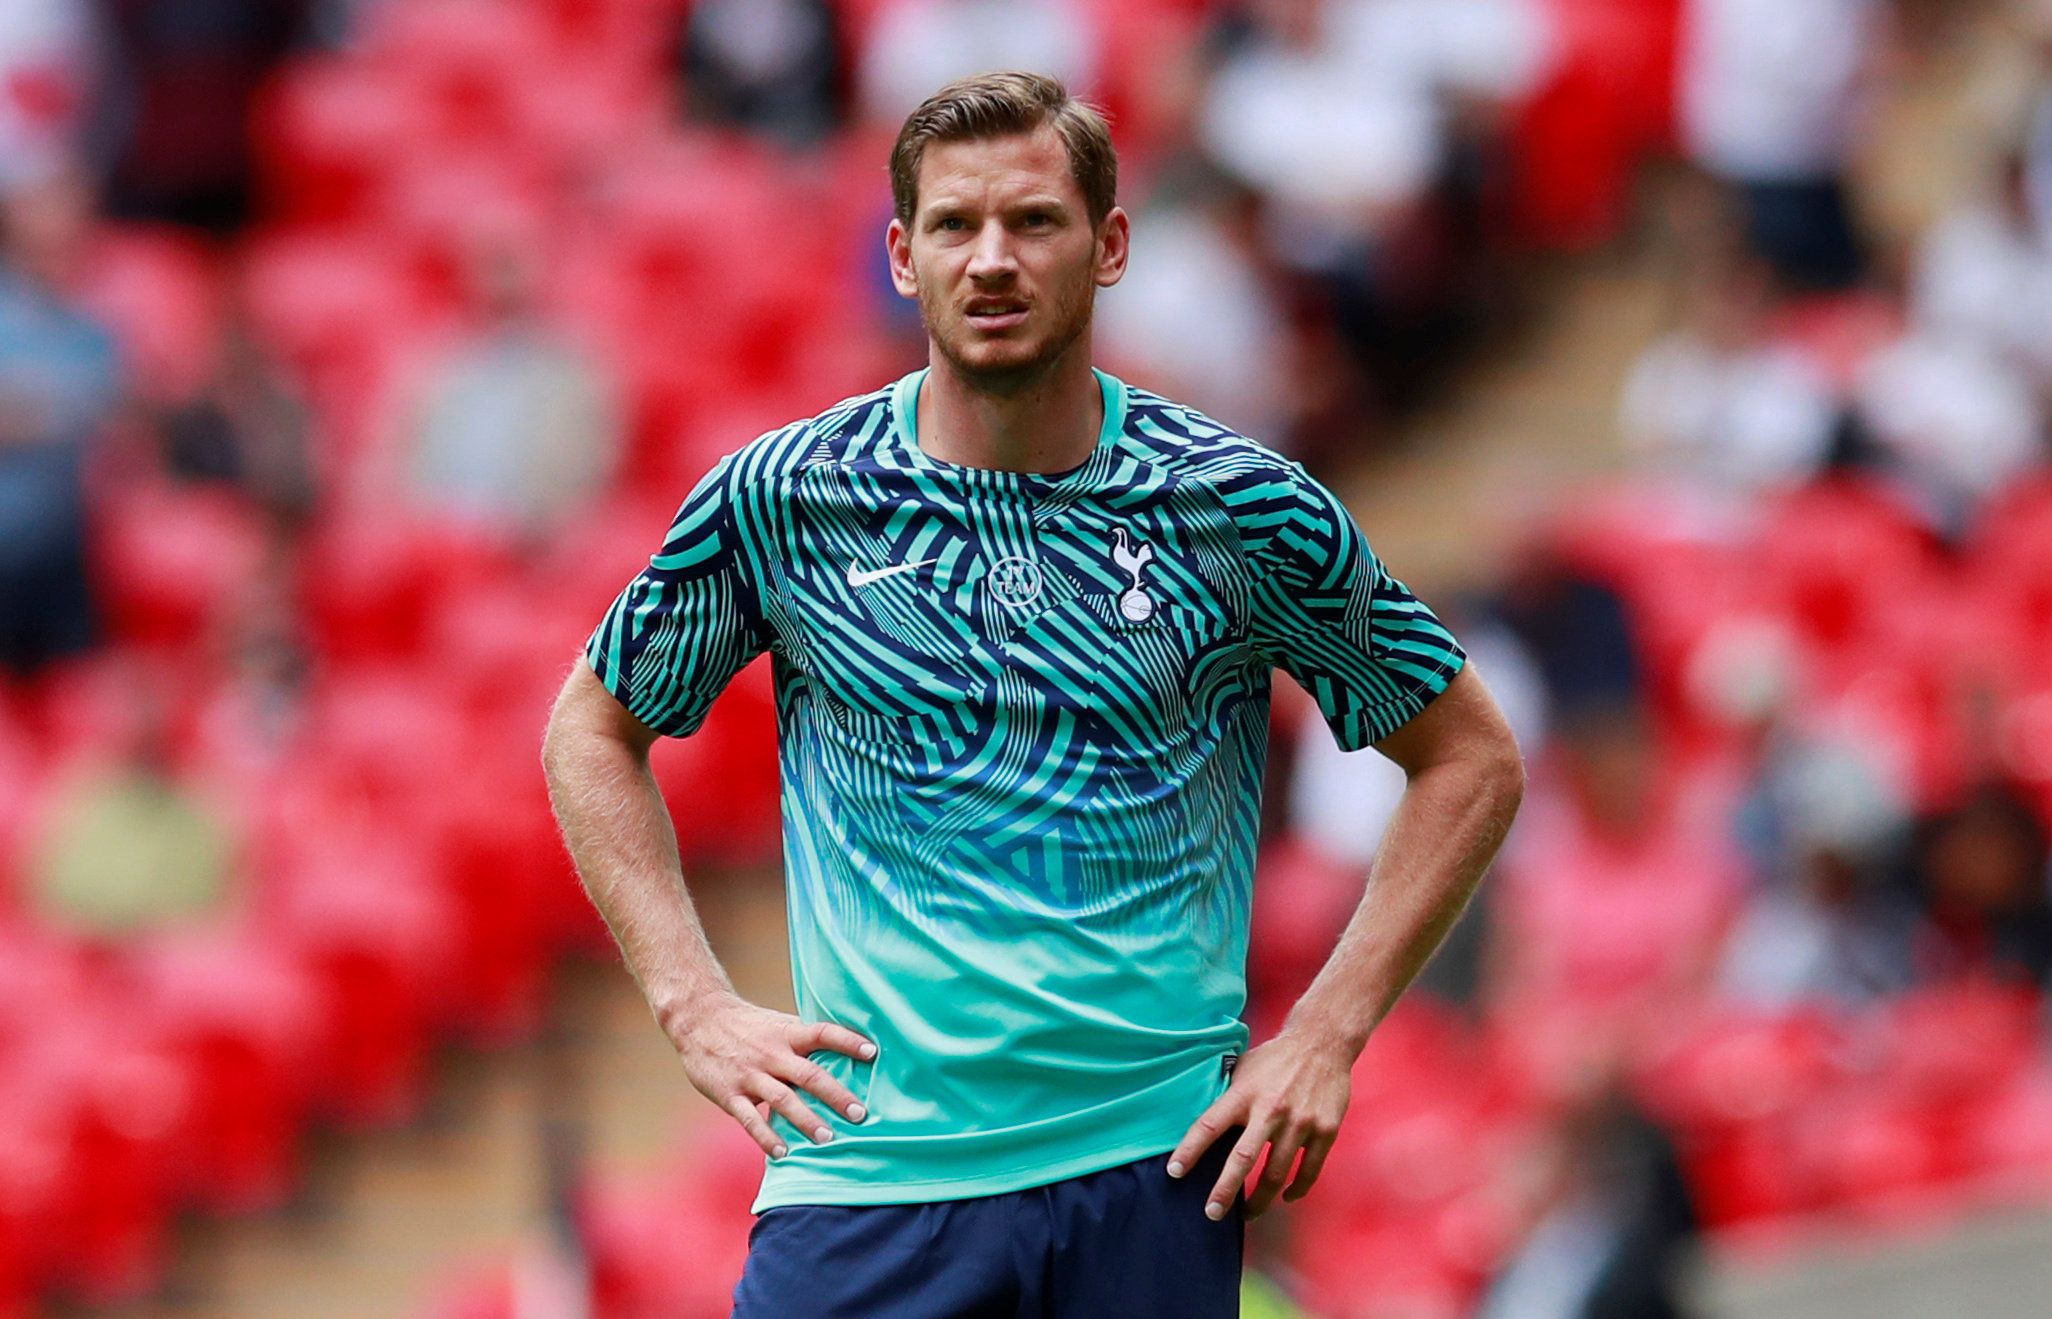 Soccer Football - Premier League - Tottenham Hotspur v Fulham - Wembley Stadium, London, Britain - August 18, 2018   Tottenham's Jan Vertonghen during the warm up before the match    Action Images via Reuters/Andrew Couldridge    EDITORIAL USE ONLY. No use with unauthorized audio, video, data, fixture lists, club/league logos or 